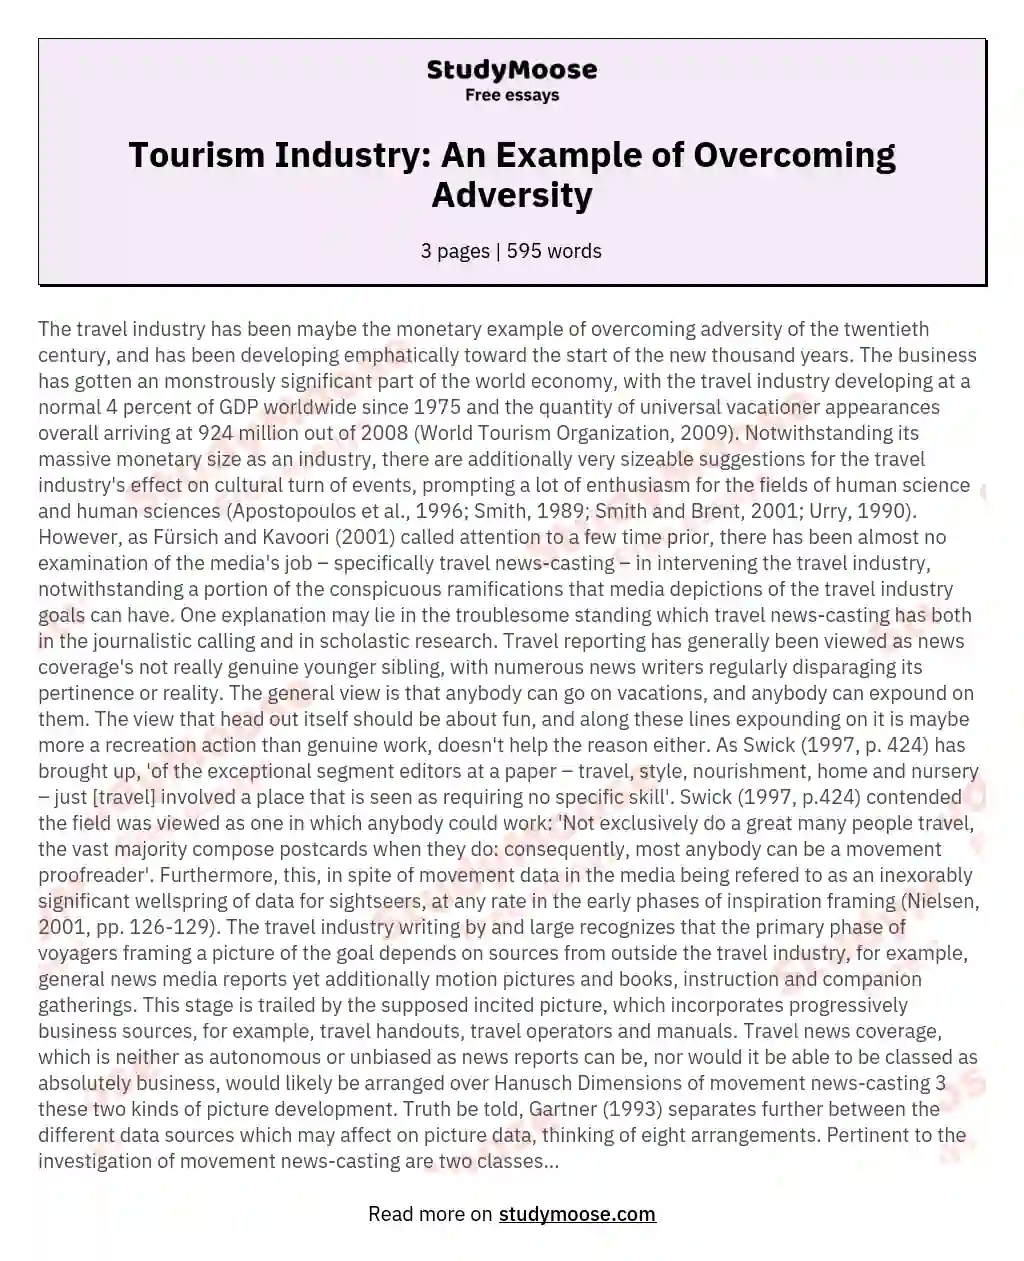 Tourism Industry: An Example of Overcoming Adversity essay